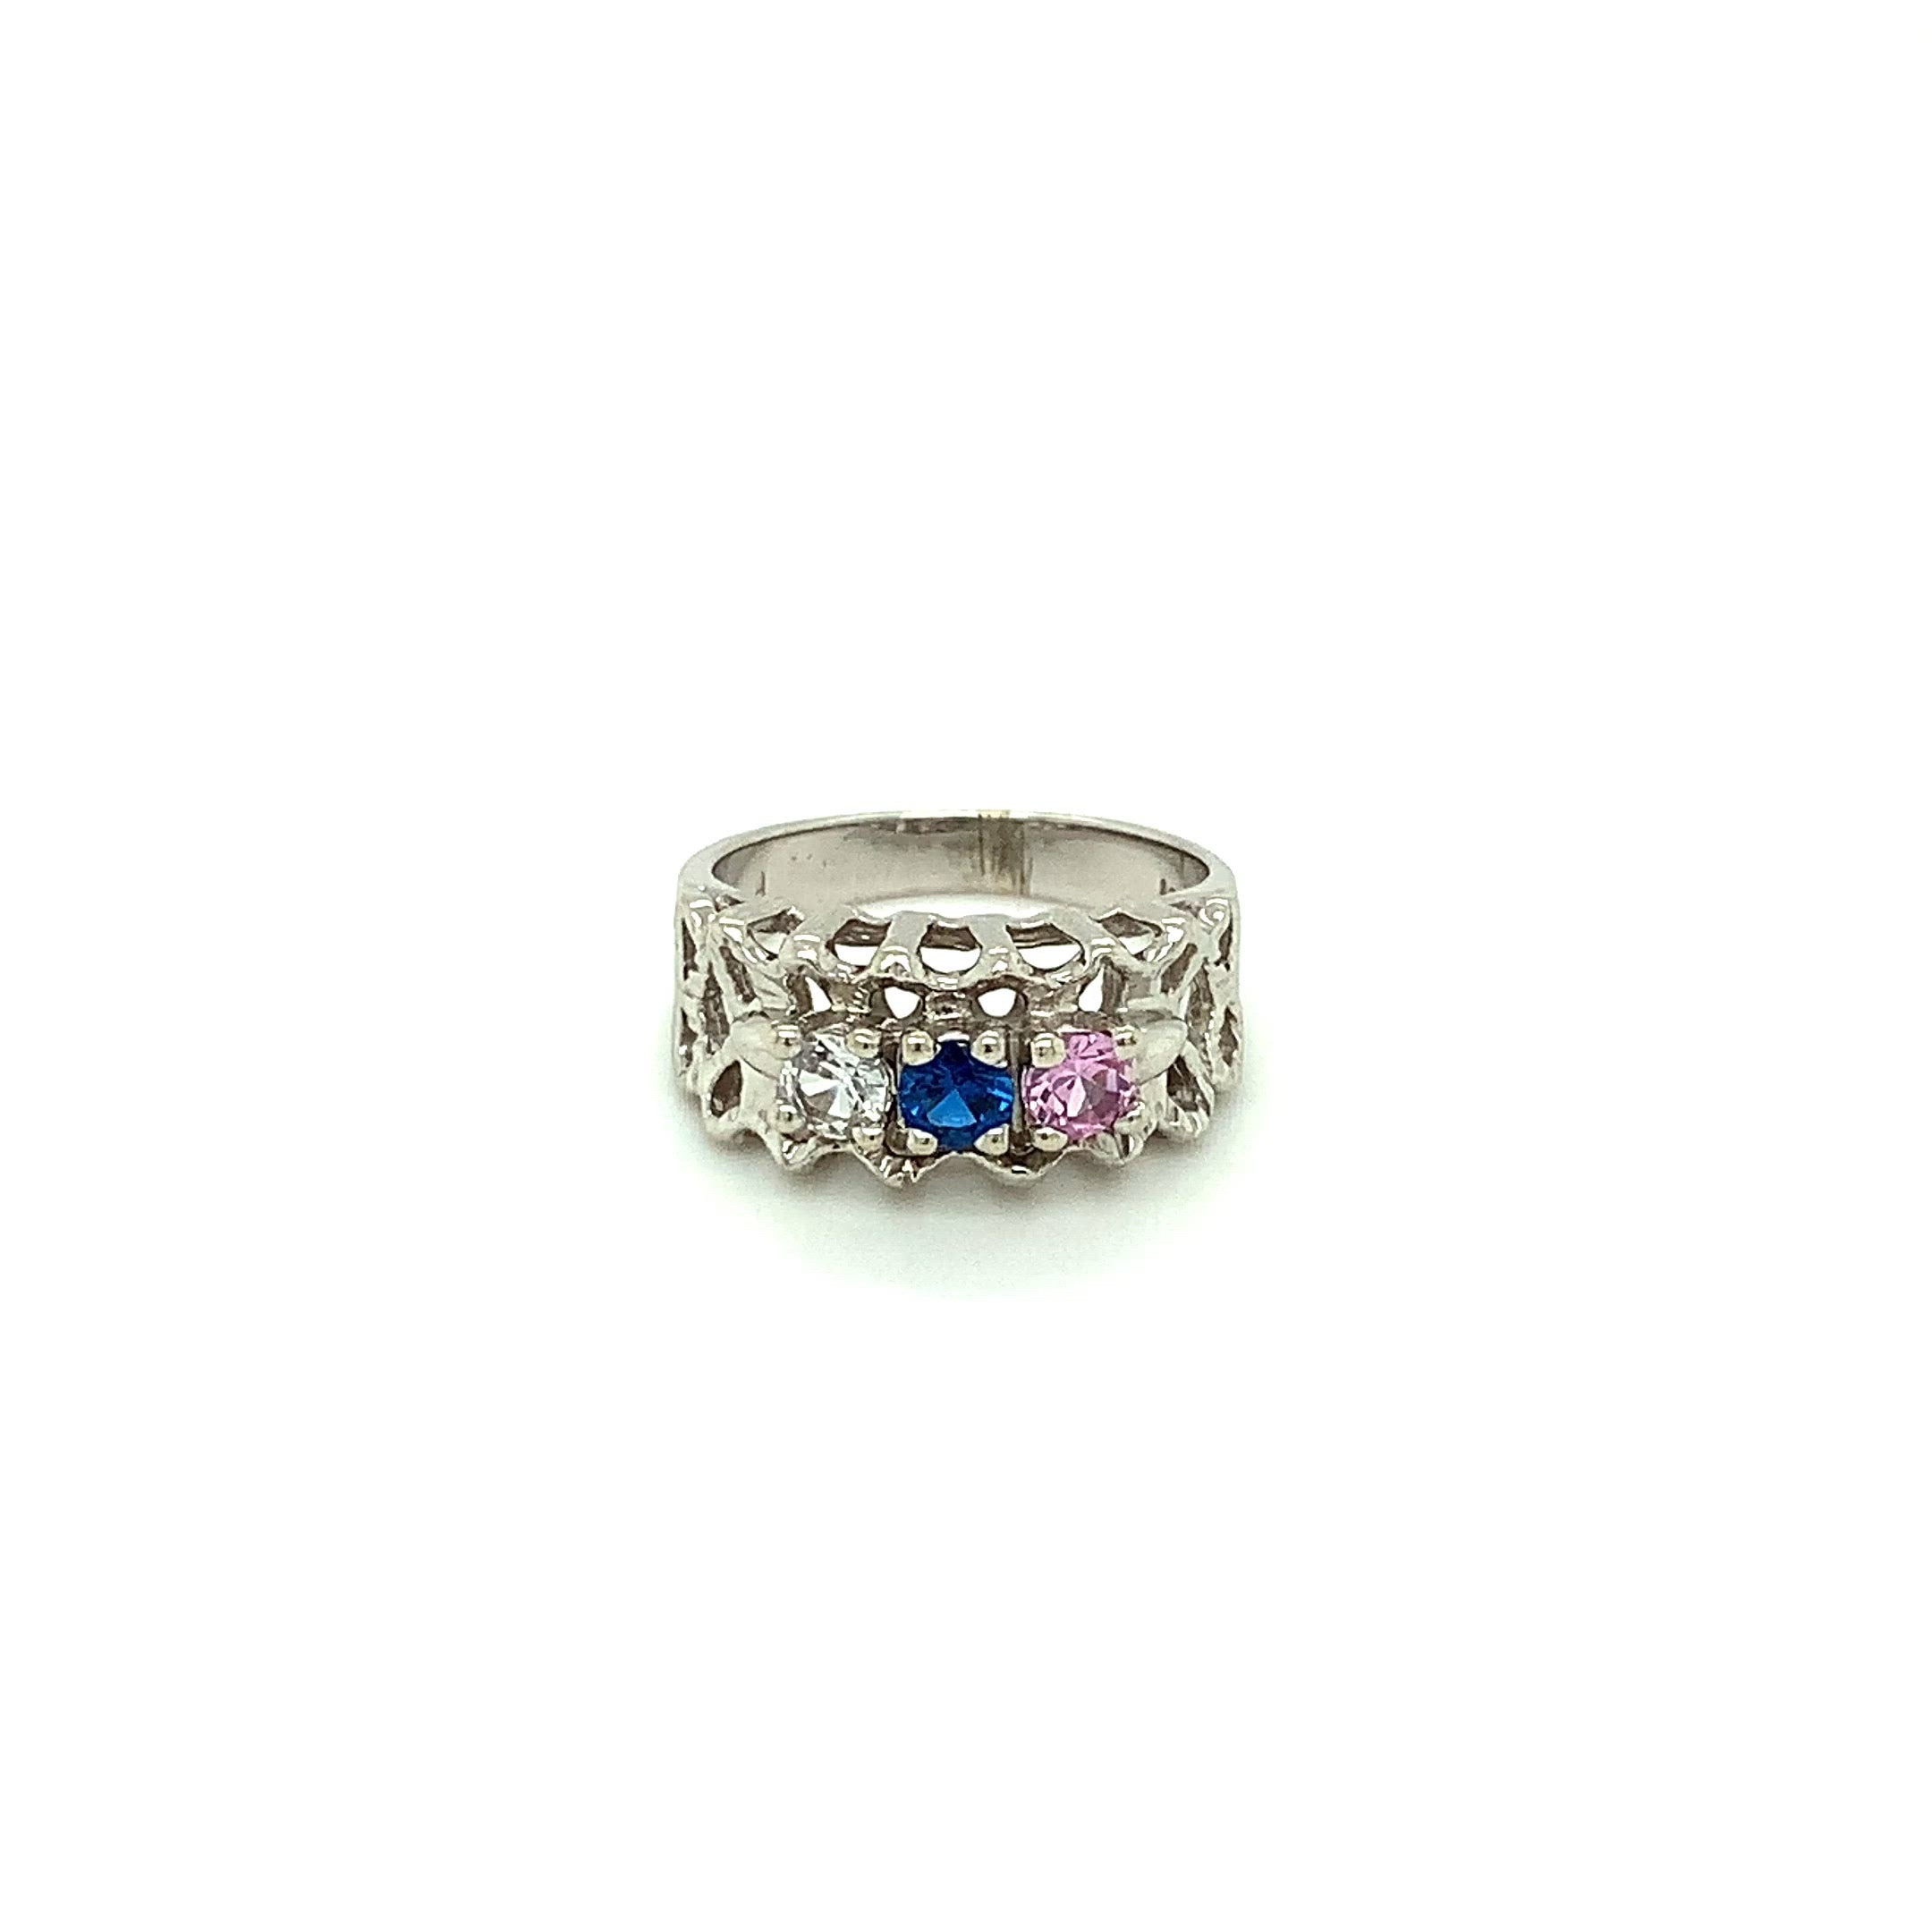 Natural Topaz & Sapphire Ring 10K Solid White Gold .51tcw Gemstone Ring Mothers Ring Birthstone Ring Topaz Ring Vintage Ring Estate Jewelry